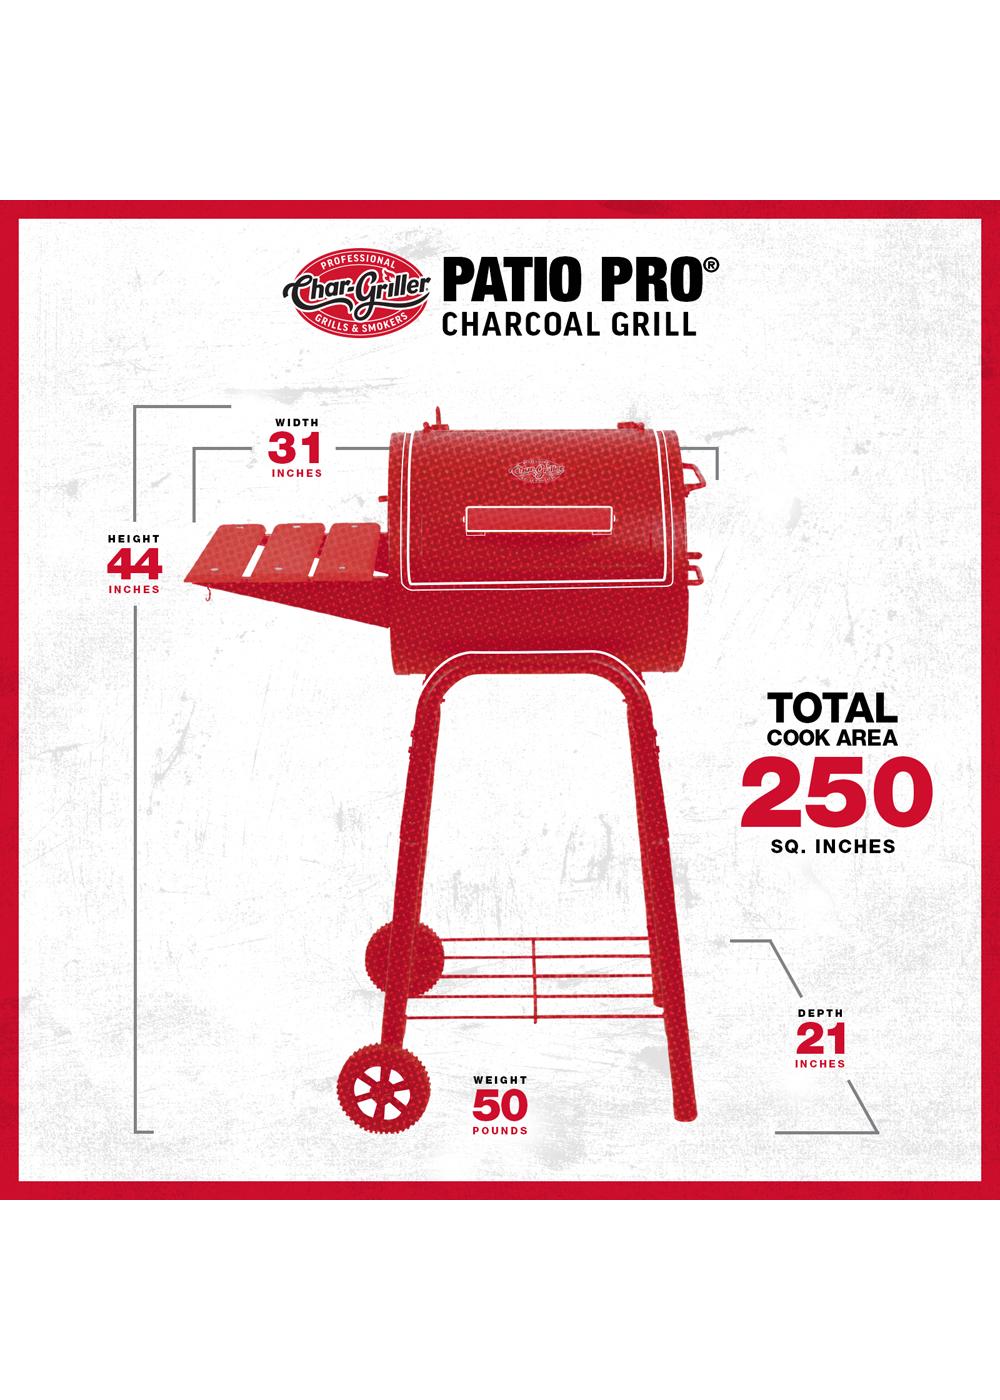 Char-Griller Patio Pro Charcoal Grill; image 4 of 4